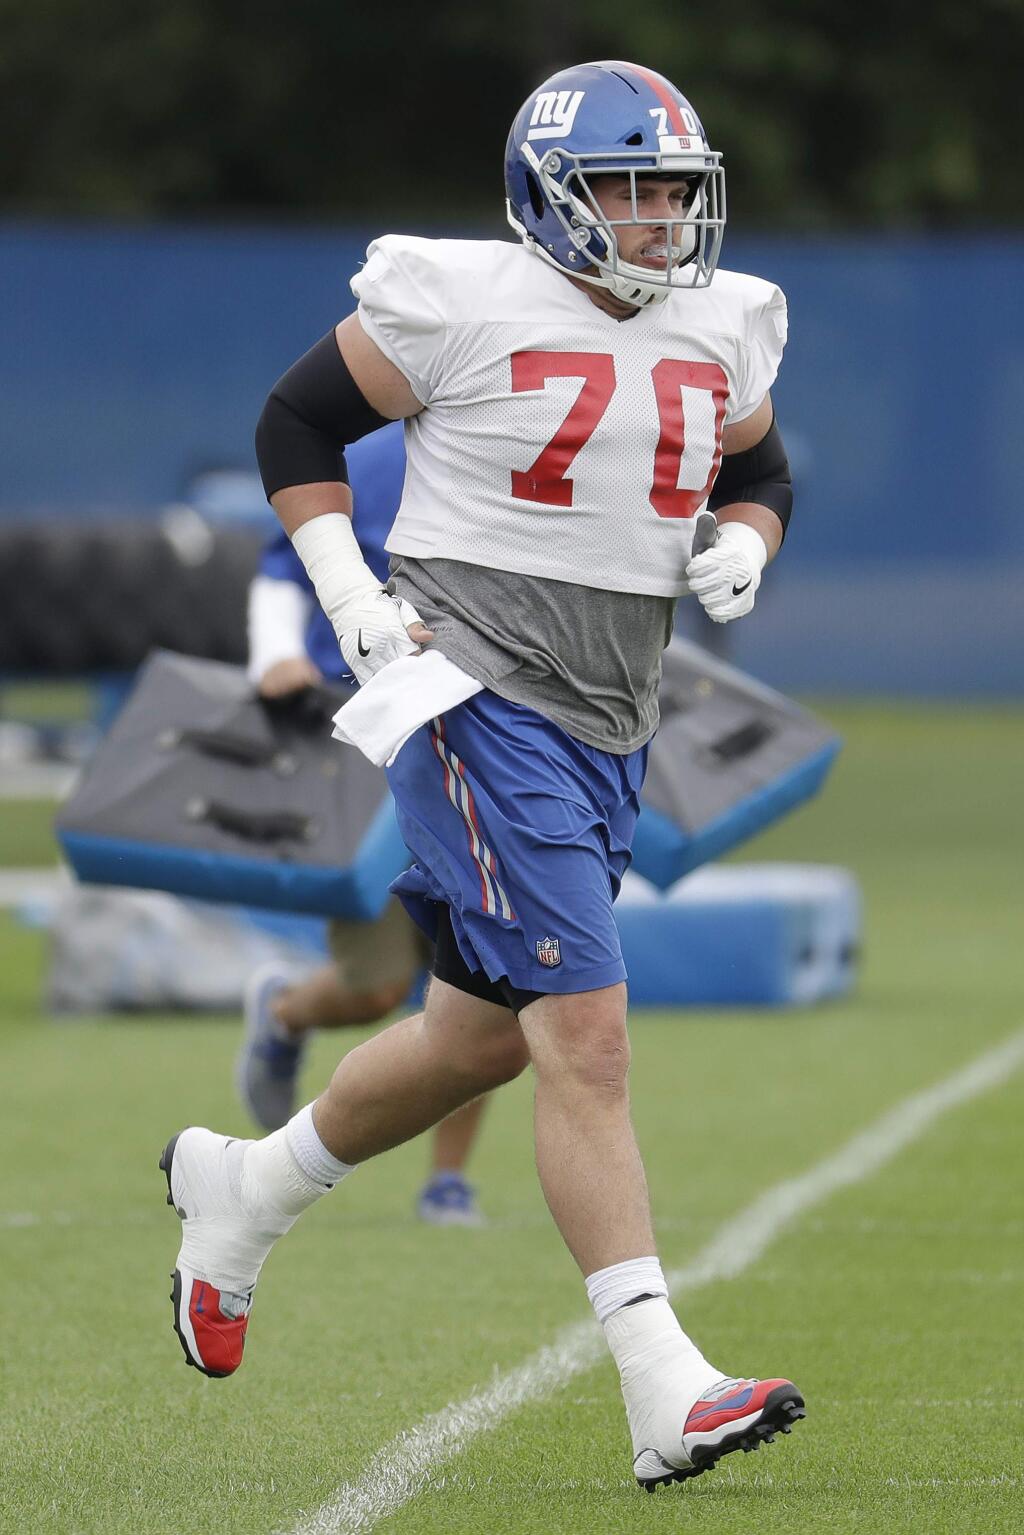 New York Giants center Weston Richburg jogs during training camp, Saturday, July 29, 2017, in East Rutherford, N.J. (AP Photo/Julio Cortez)